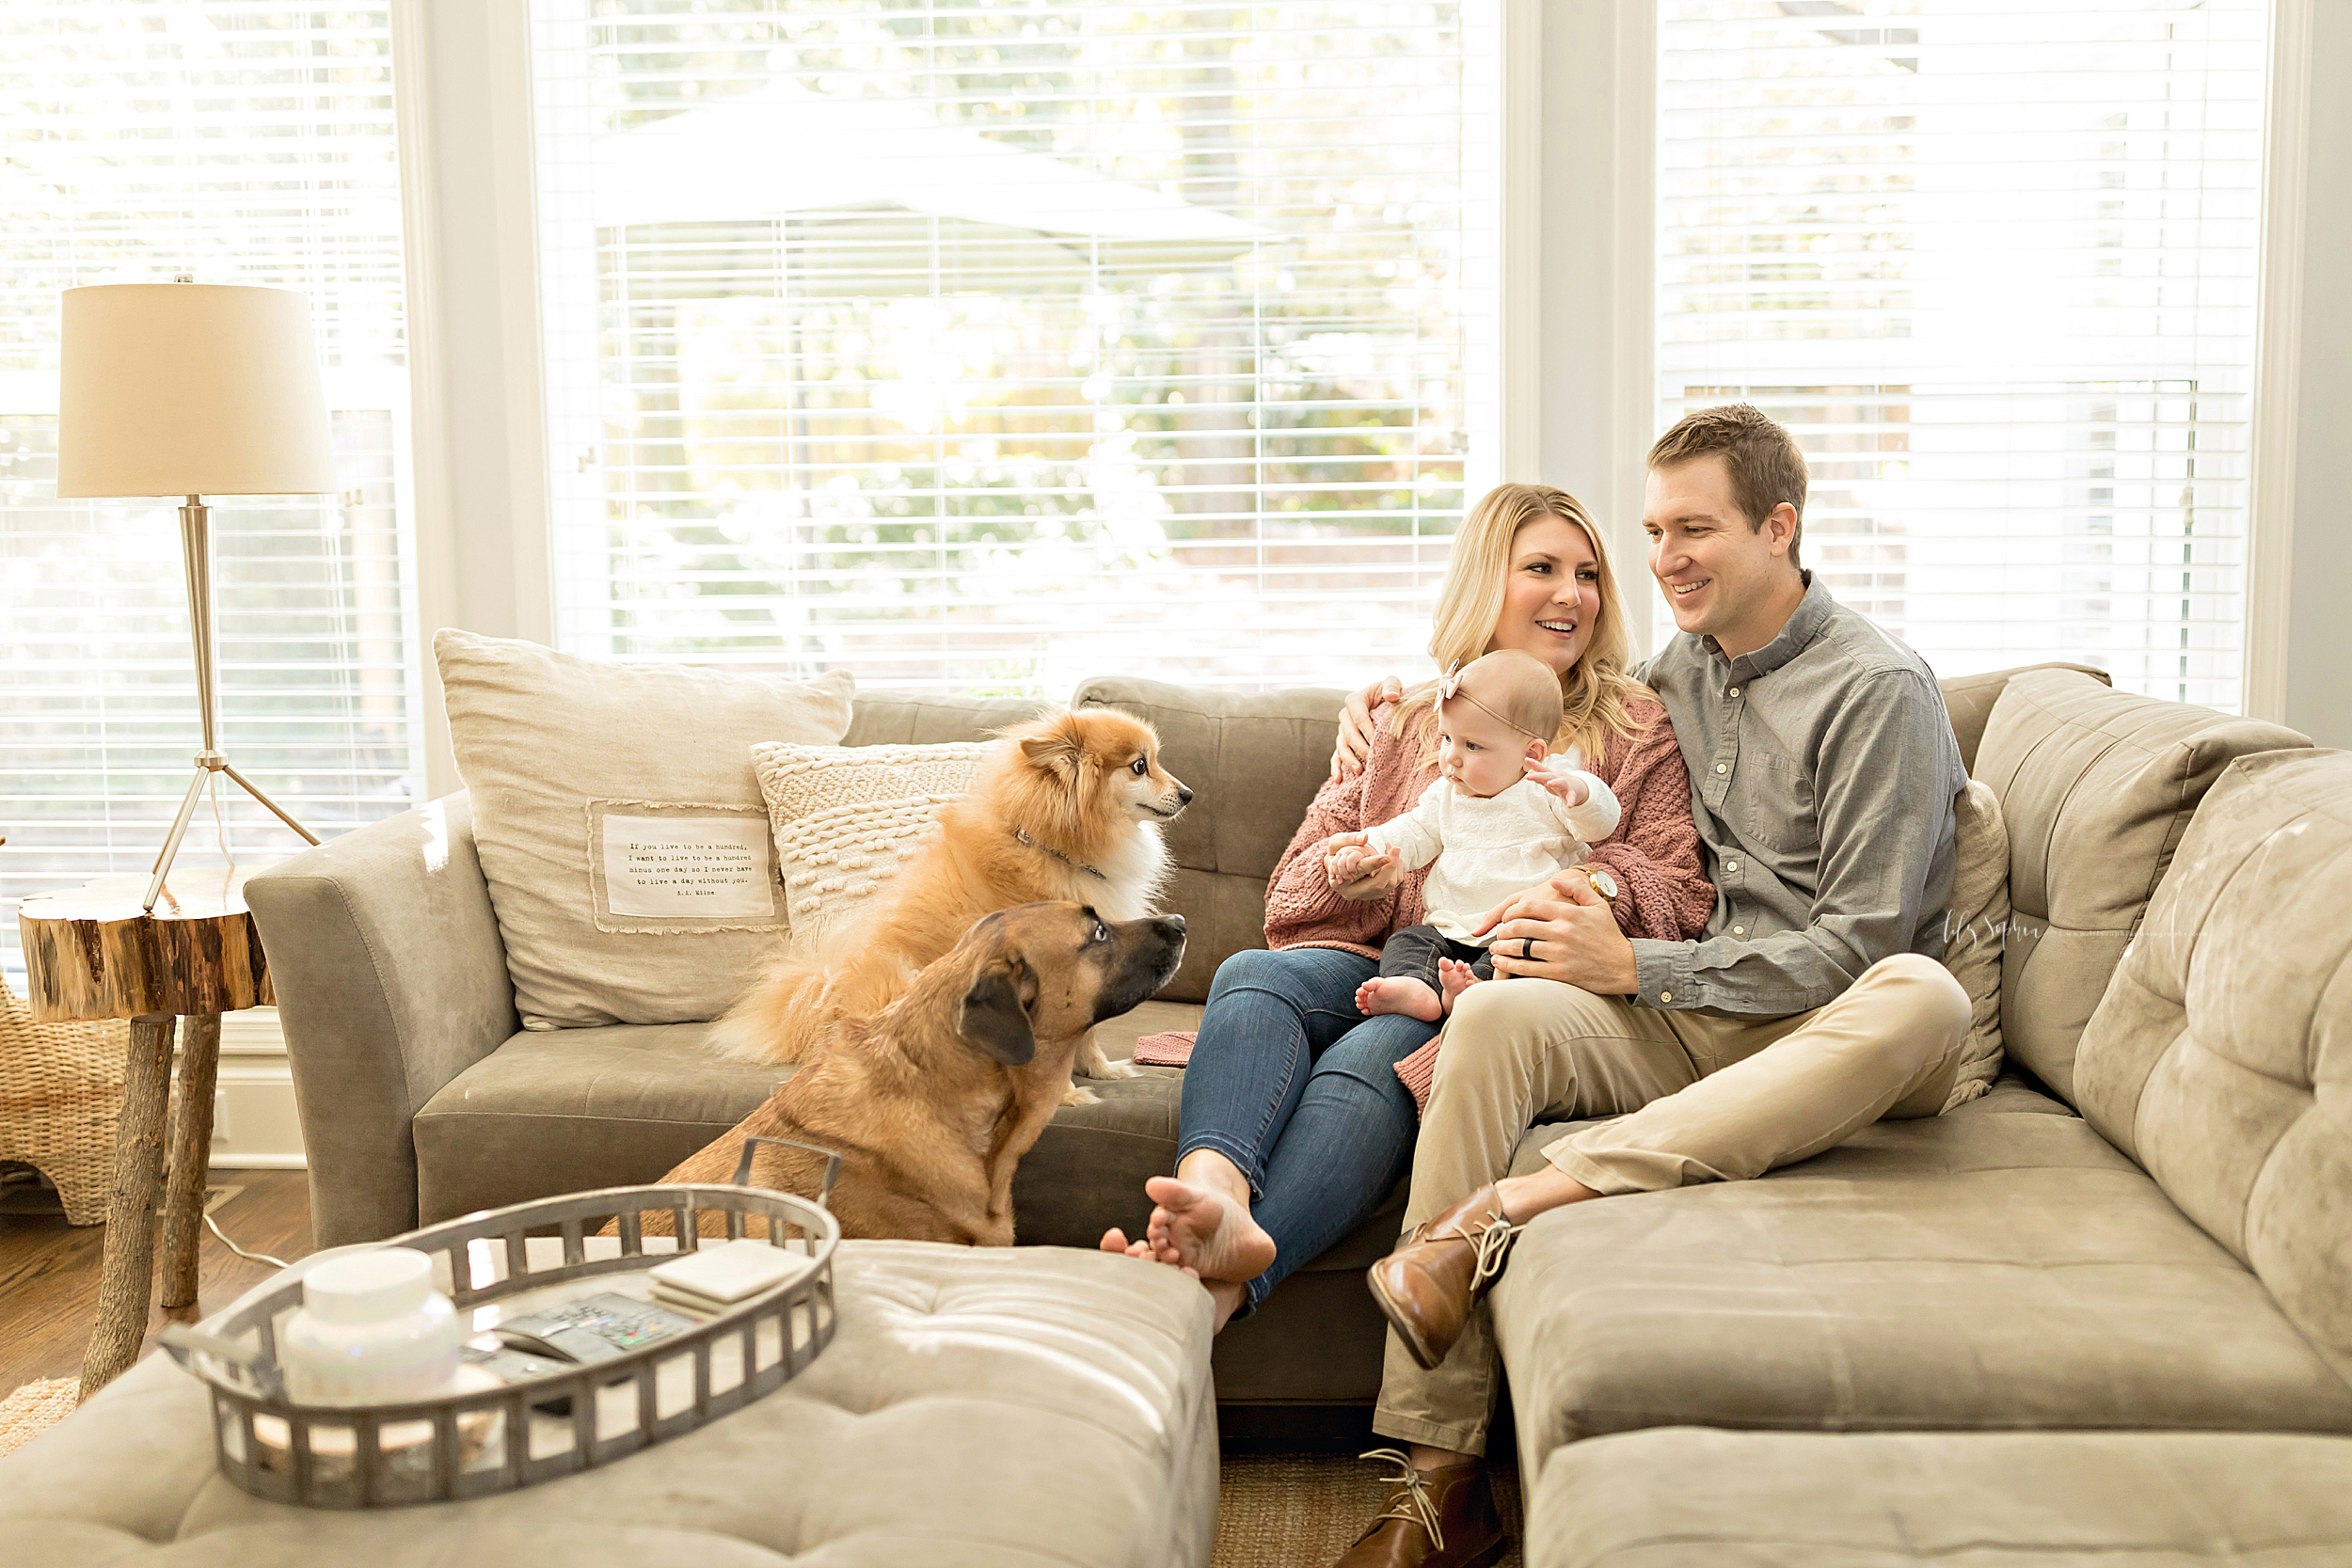 atlanta-midtown-brookhaven-ashford-dunwoody-virginia-highlands-roswell-decatur-lily-sophia-photography-in-home-six-month-milestone-family-lifestyle-session-sandy-springs_0648.jpg